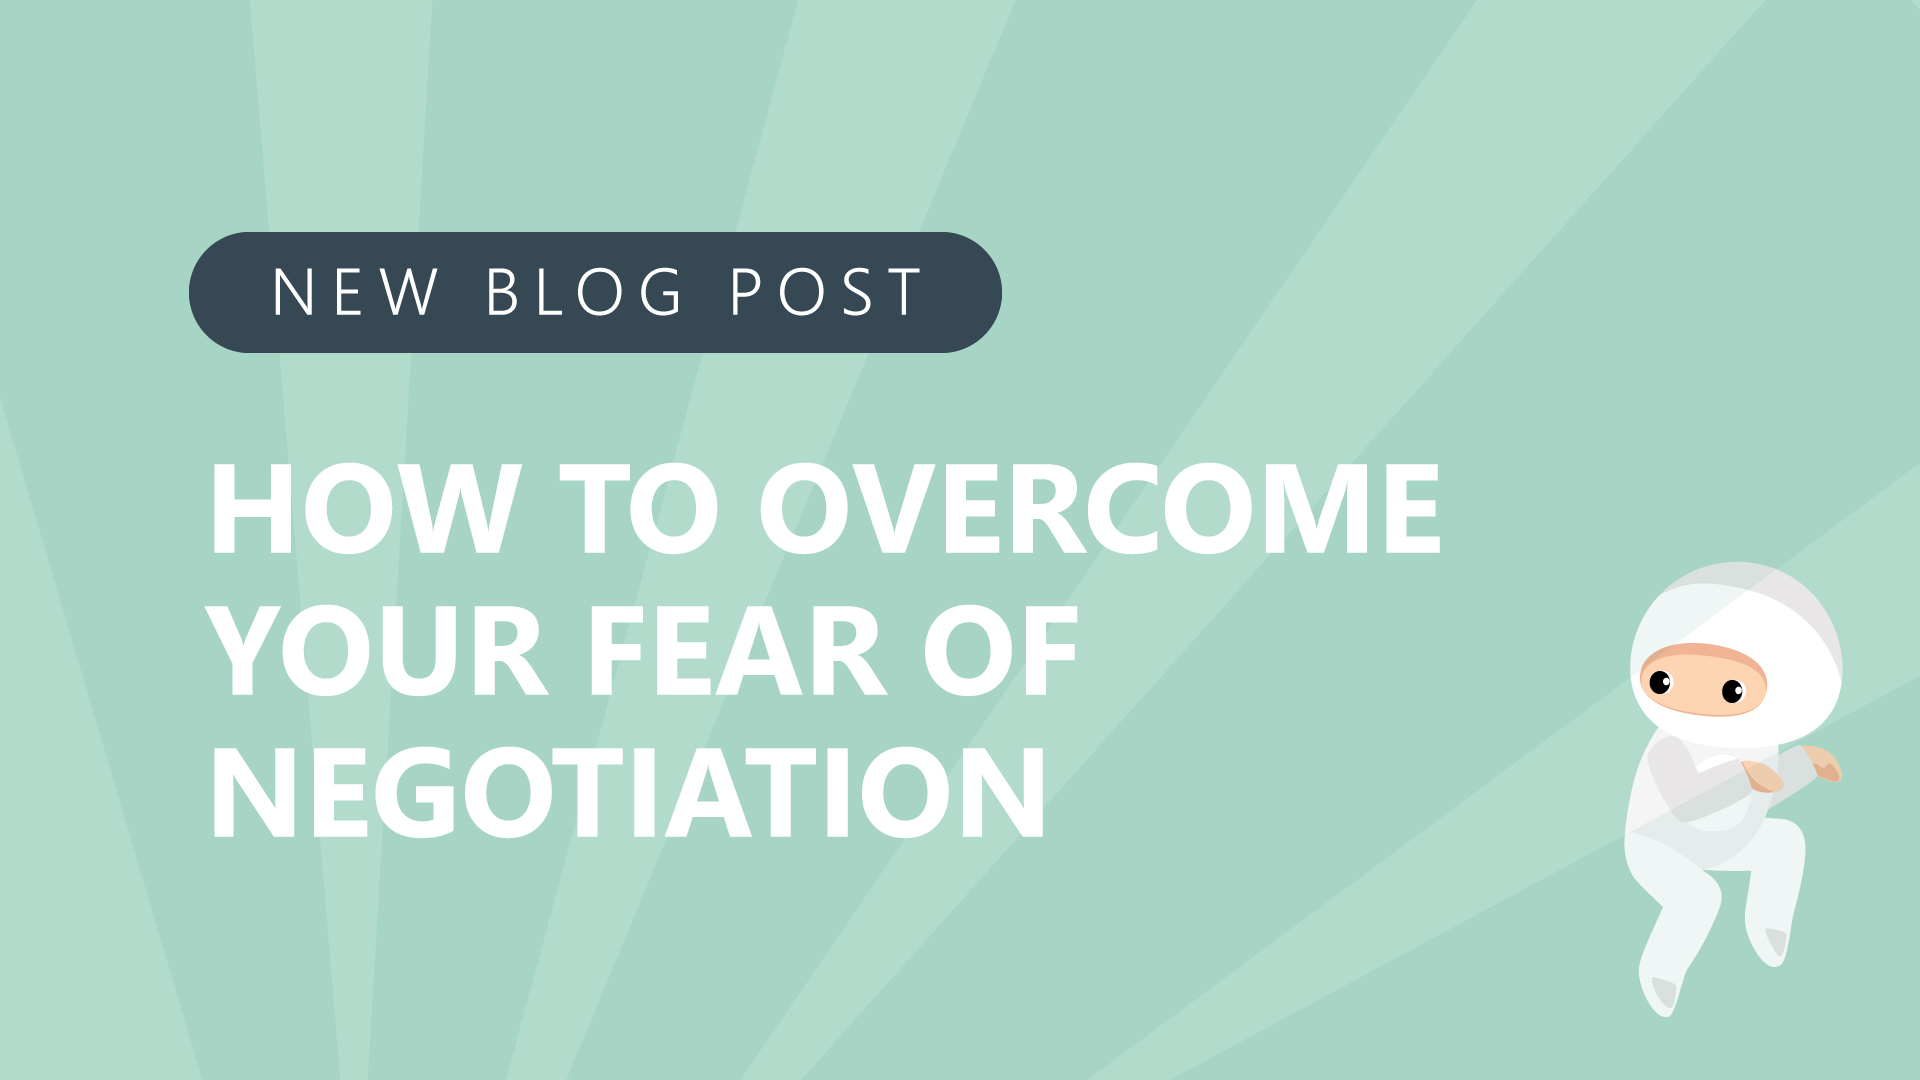 17 how to overcome your fear of negotiation